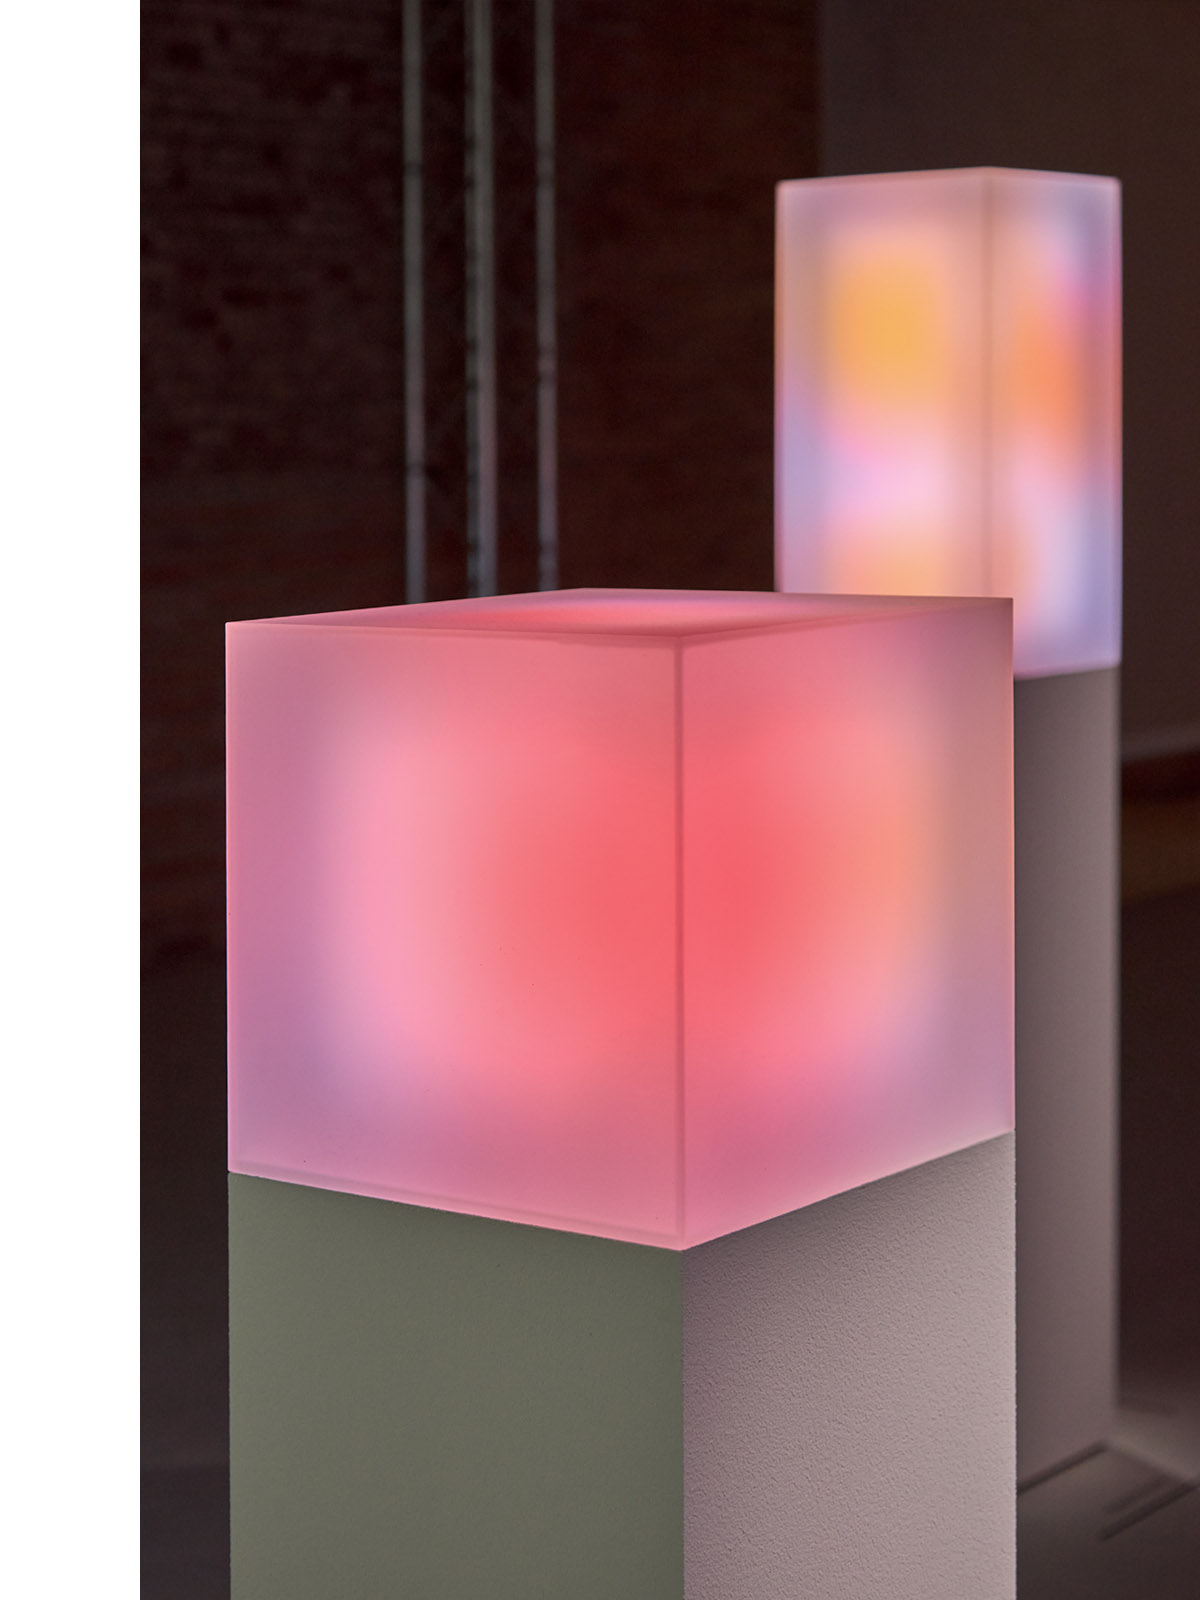 Close-up of a glowing pink cube on a pedestal with a softly lit, colorful cube in the background, part of an art installation with a focus on light and color